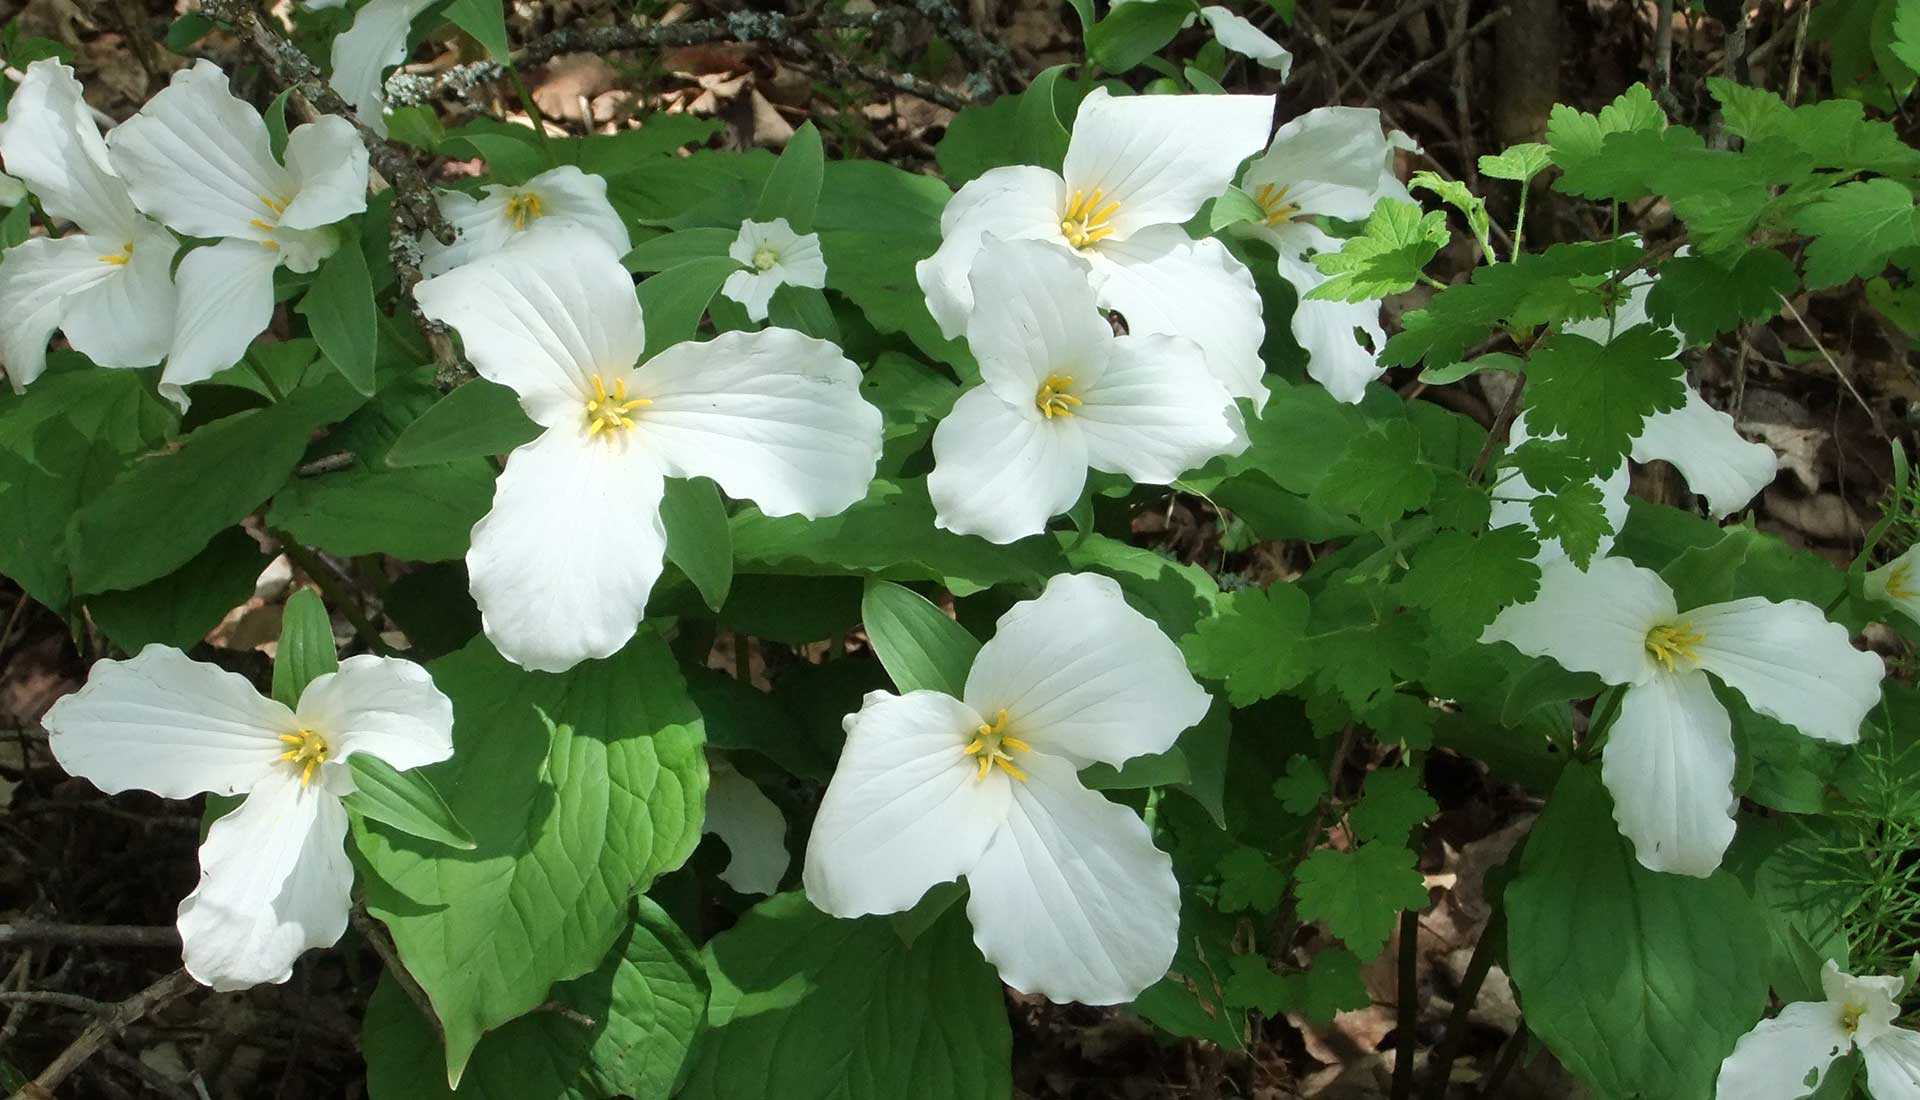 Trilliums at the Fleetwood property